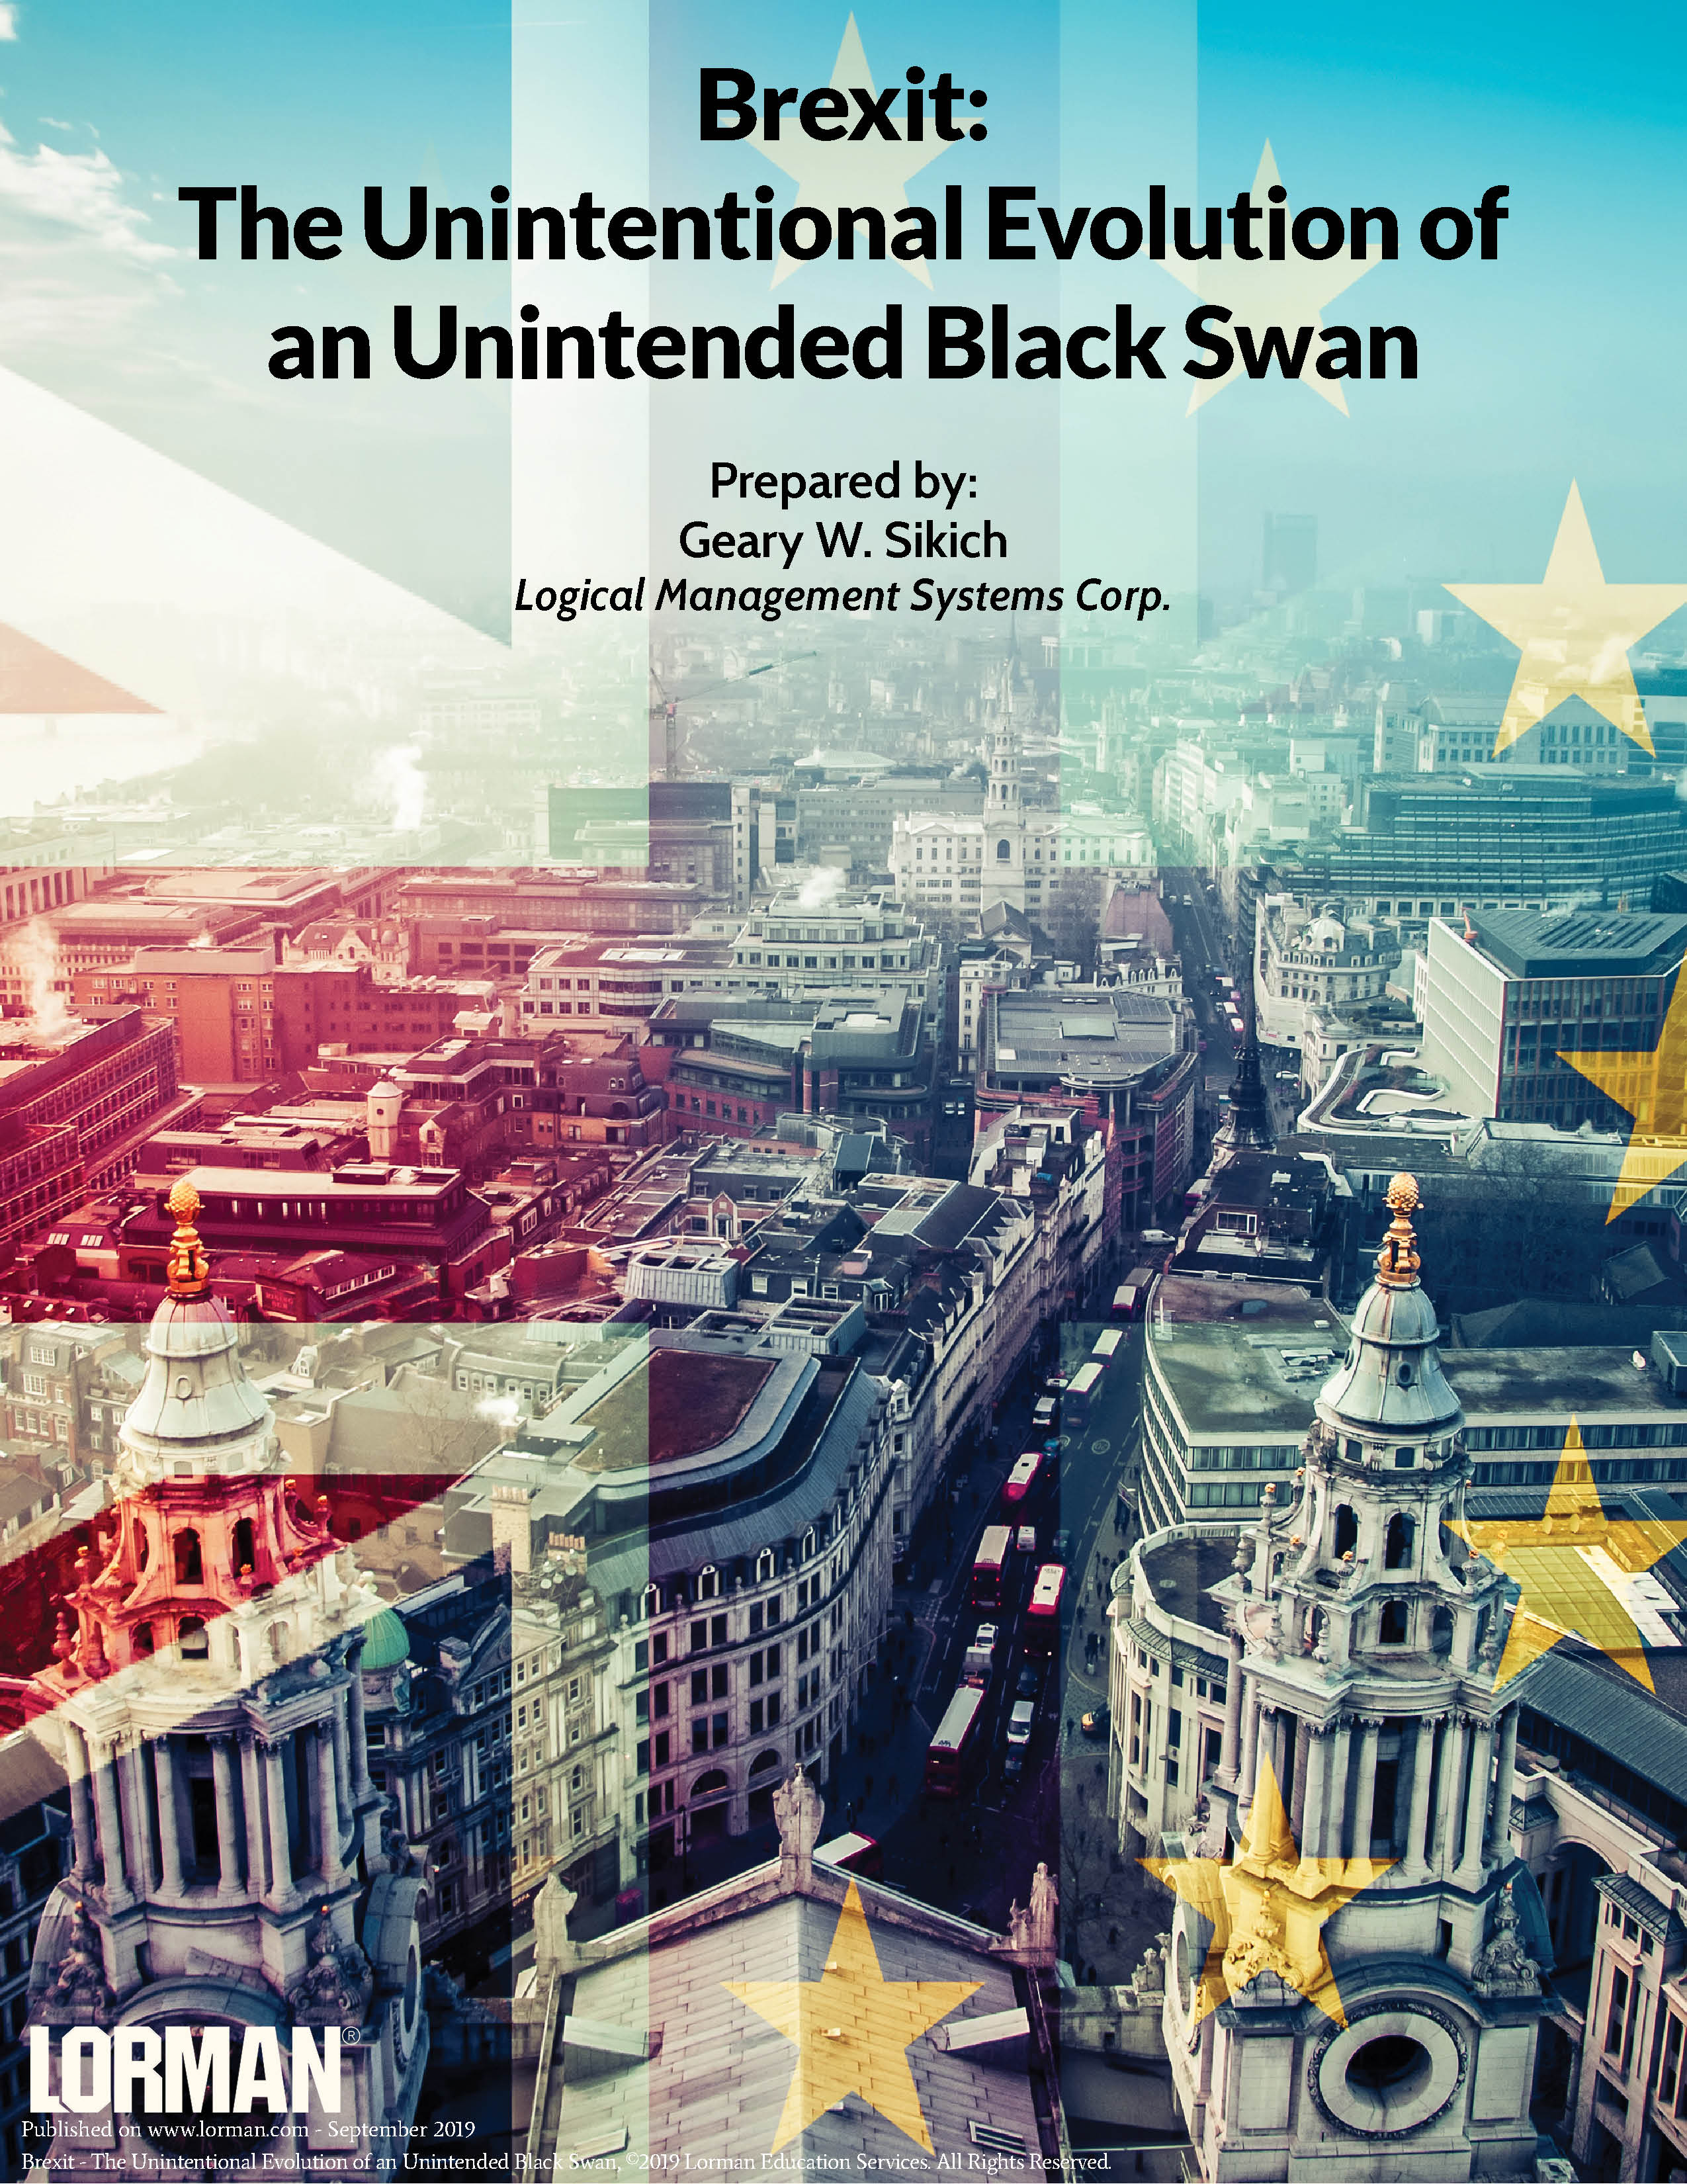 Brexit: The Unintentional Evolution of an Unintended Black Swan